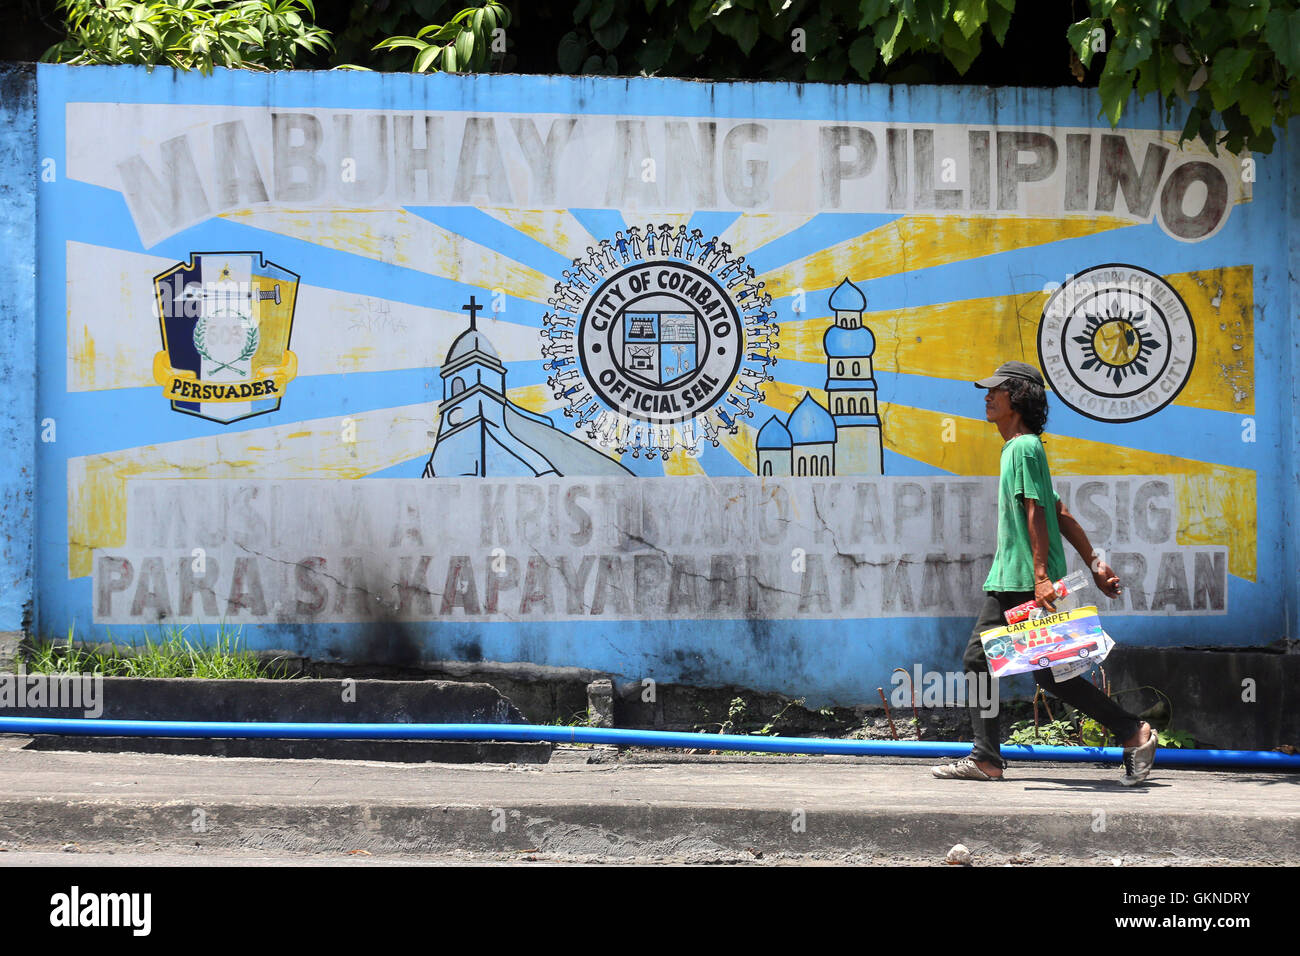 City Seal of the city of Cotabato on a wall in Cotabato. Mindanao, The Philippines. Translation: Long live the Philippines - Muslims and Christians hand in hand for peace and development. Stock Photo